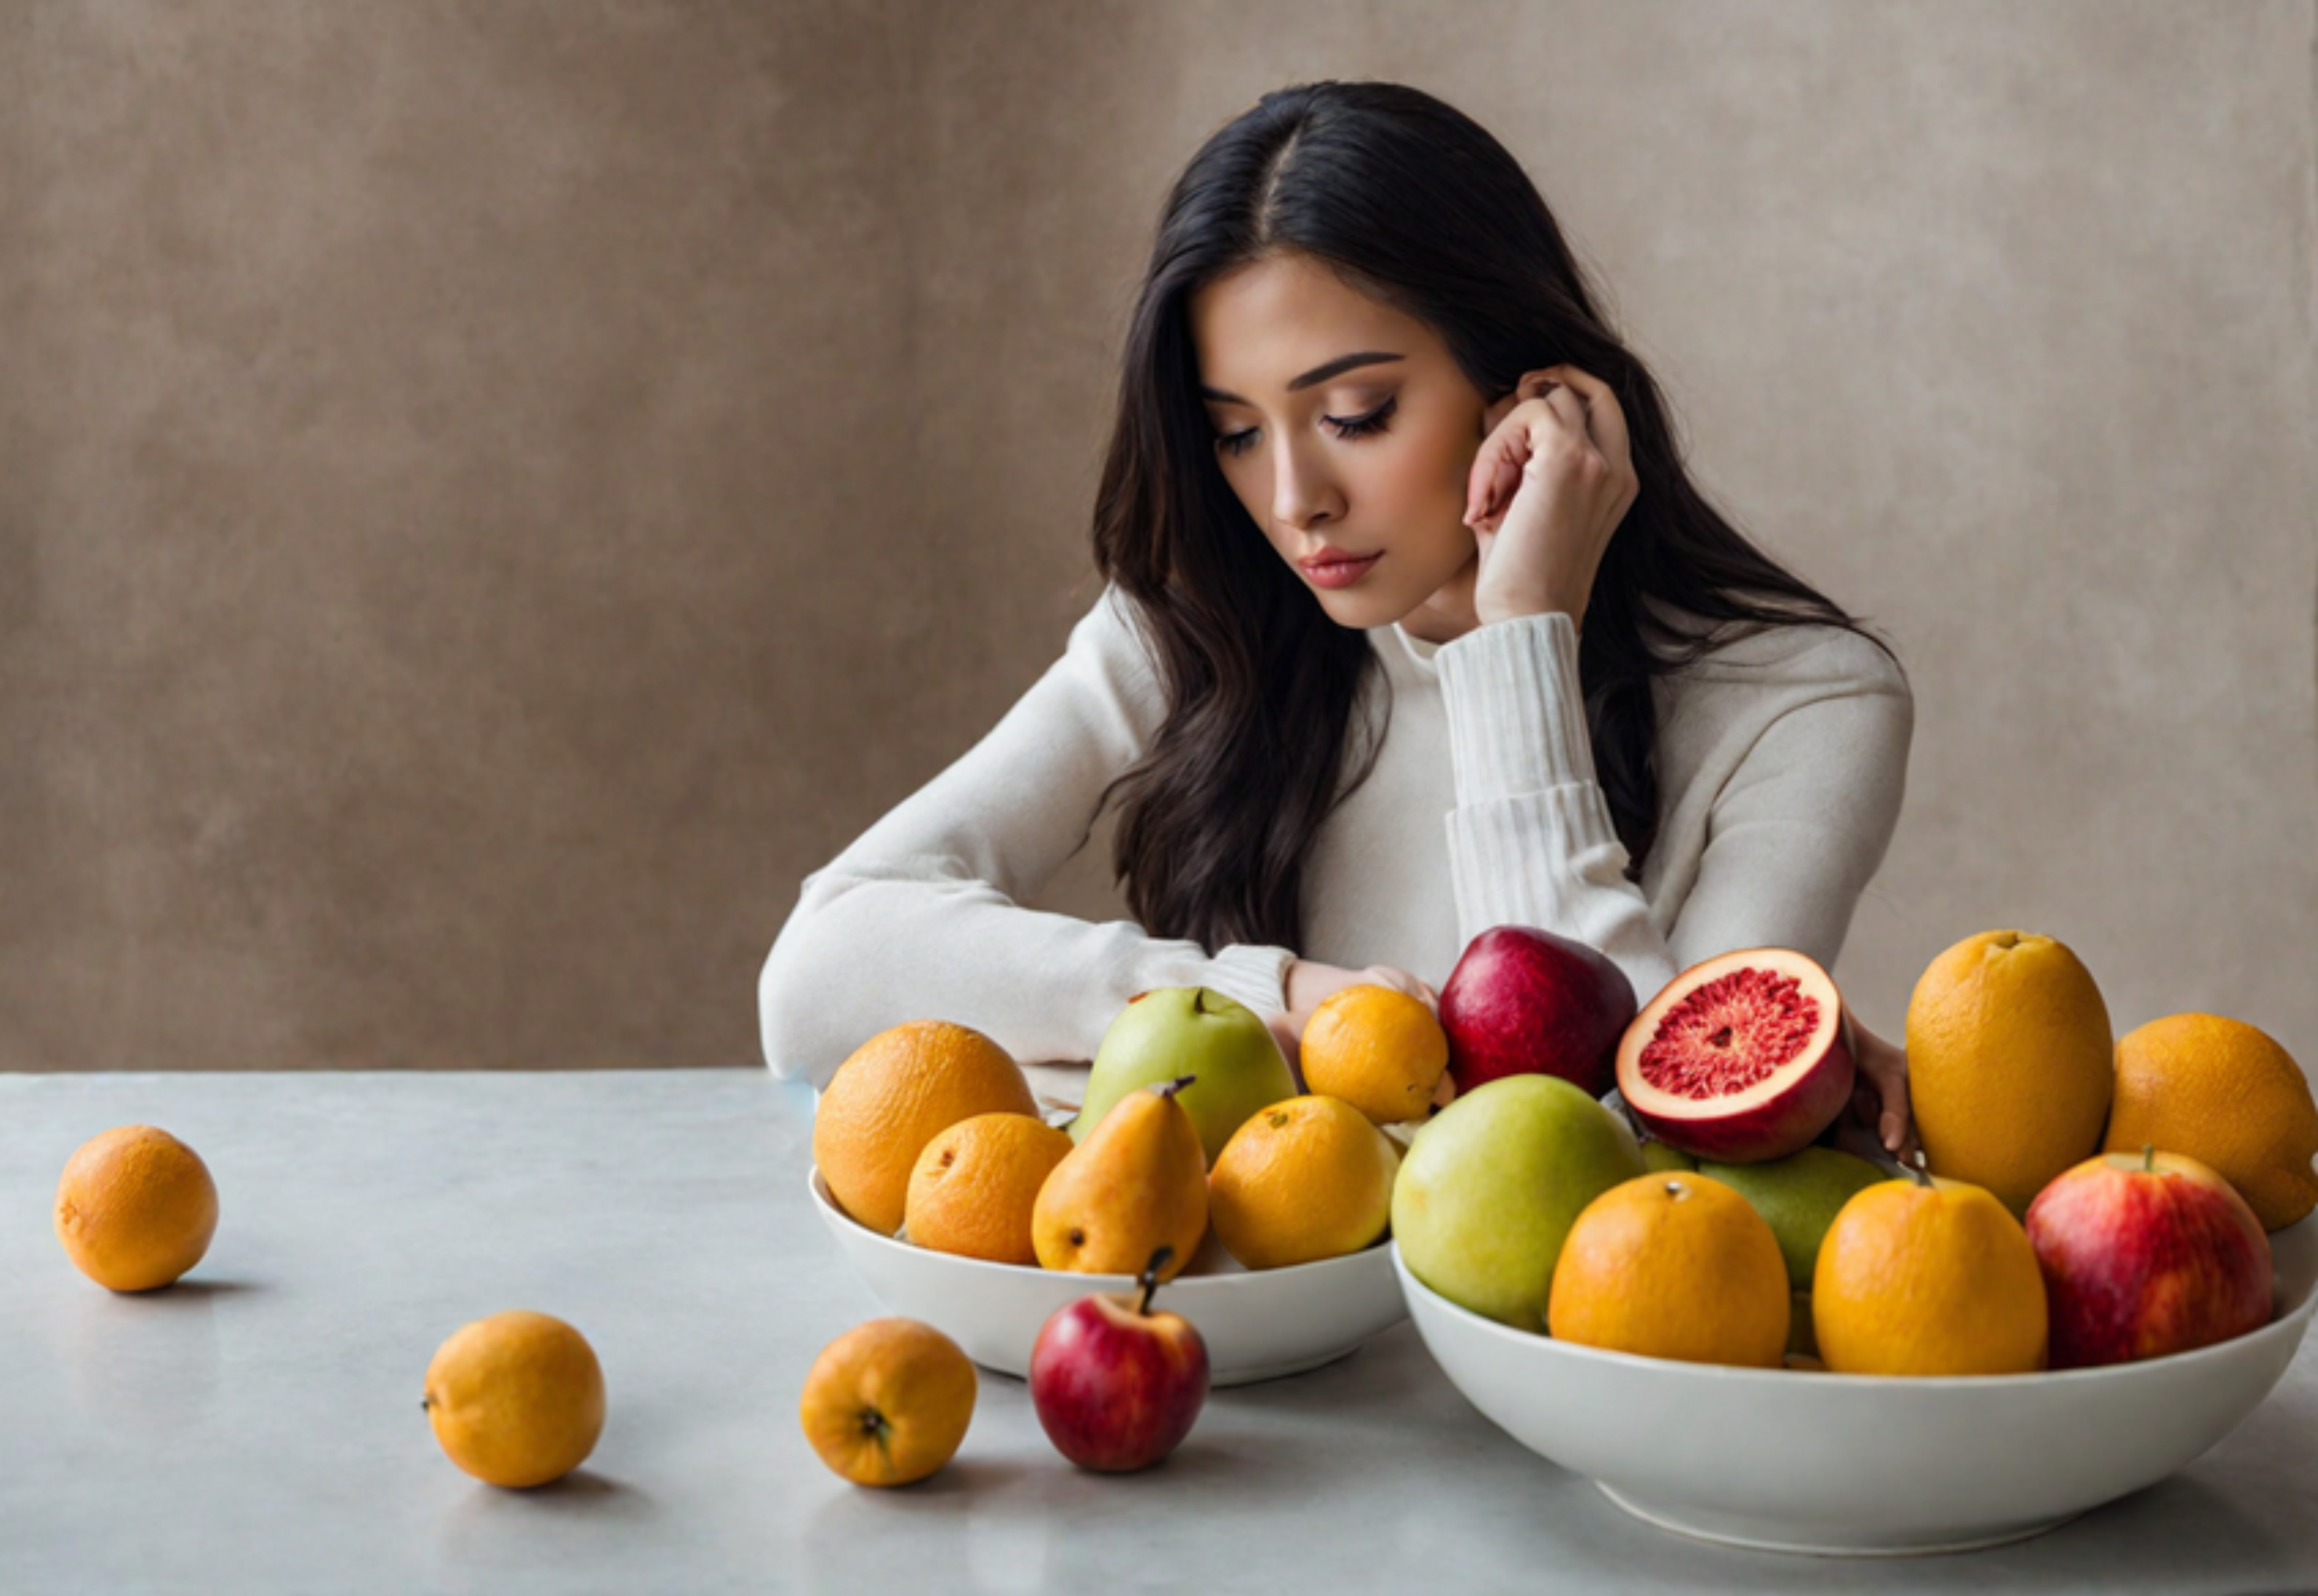 a-sad-woman-sits-at-a-table-and-is-looking-at-fruits-613746174.png__PID:4a914b25-94a5-4c5d-a1a8-65f8003b1f69